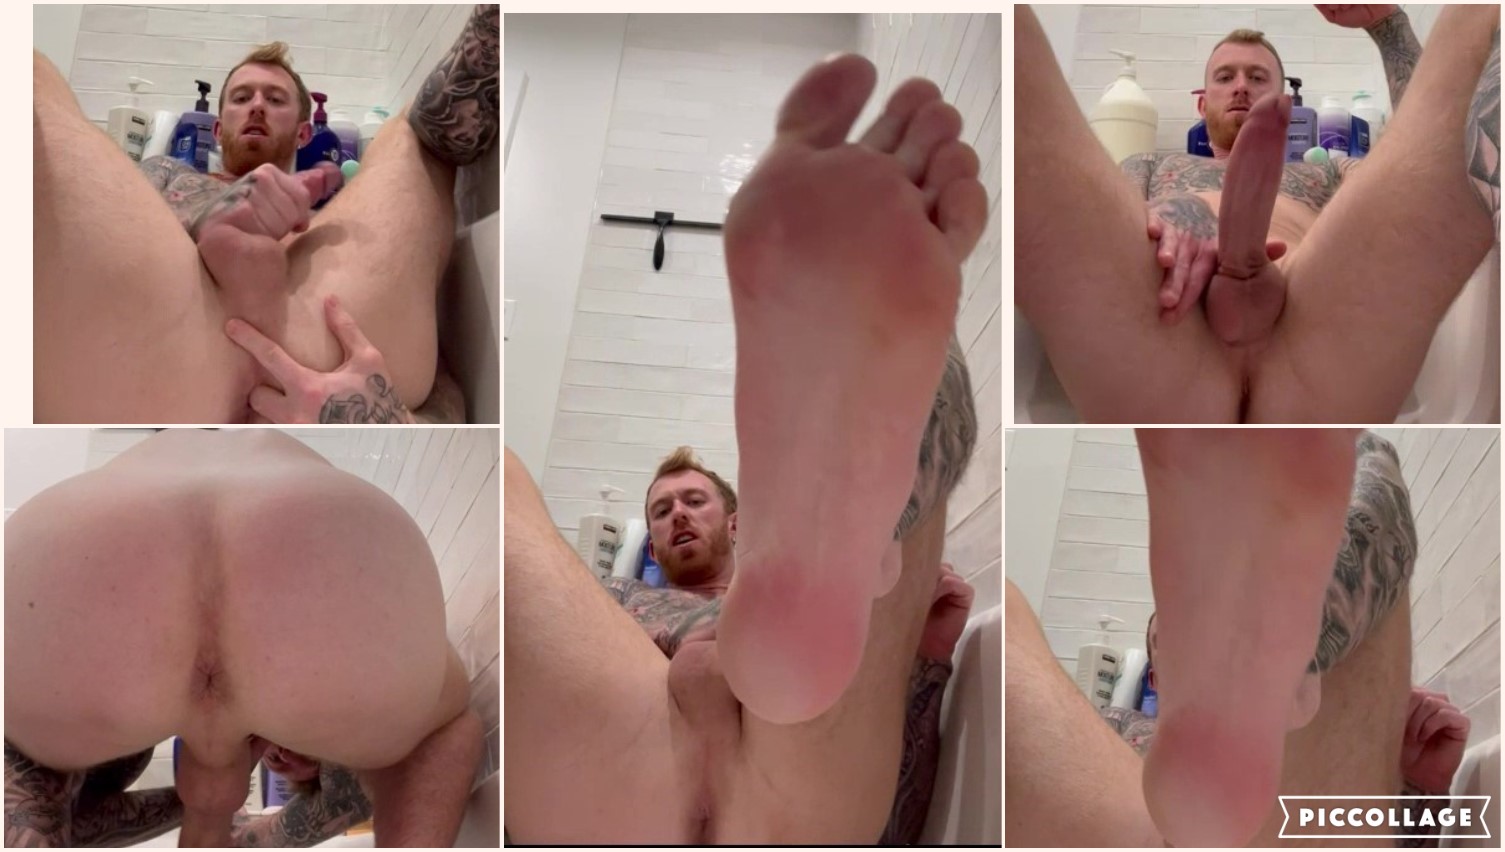 Big Sexy Alpha Shows Off His Big Cock Feet And Hole